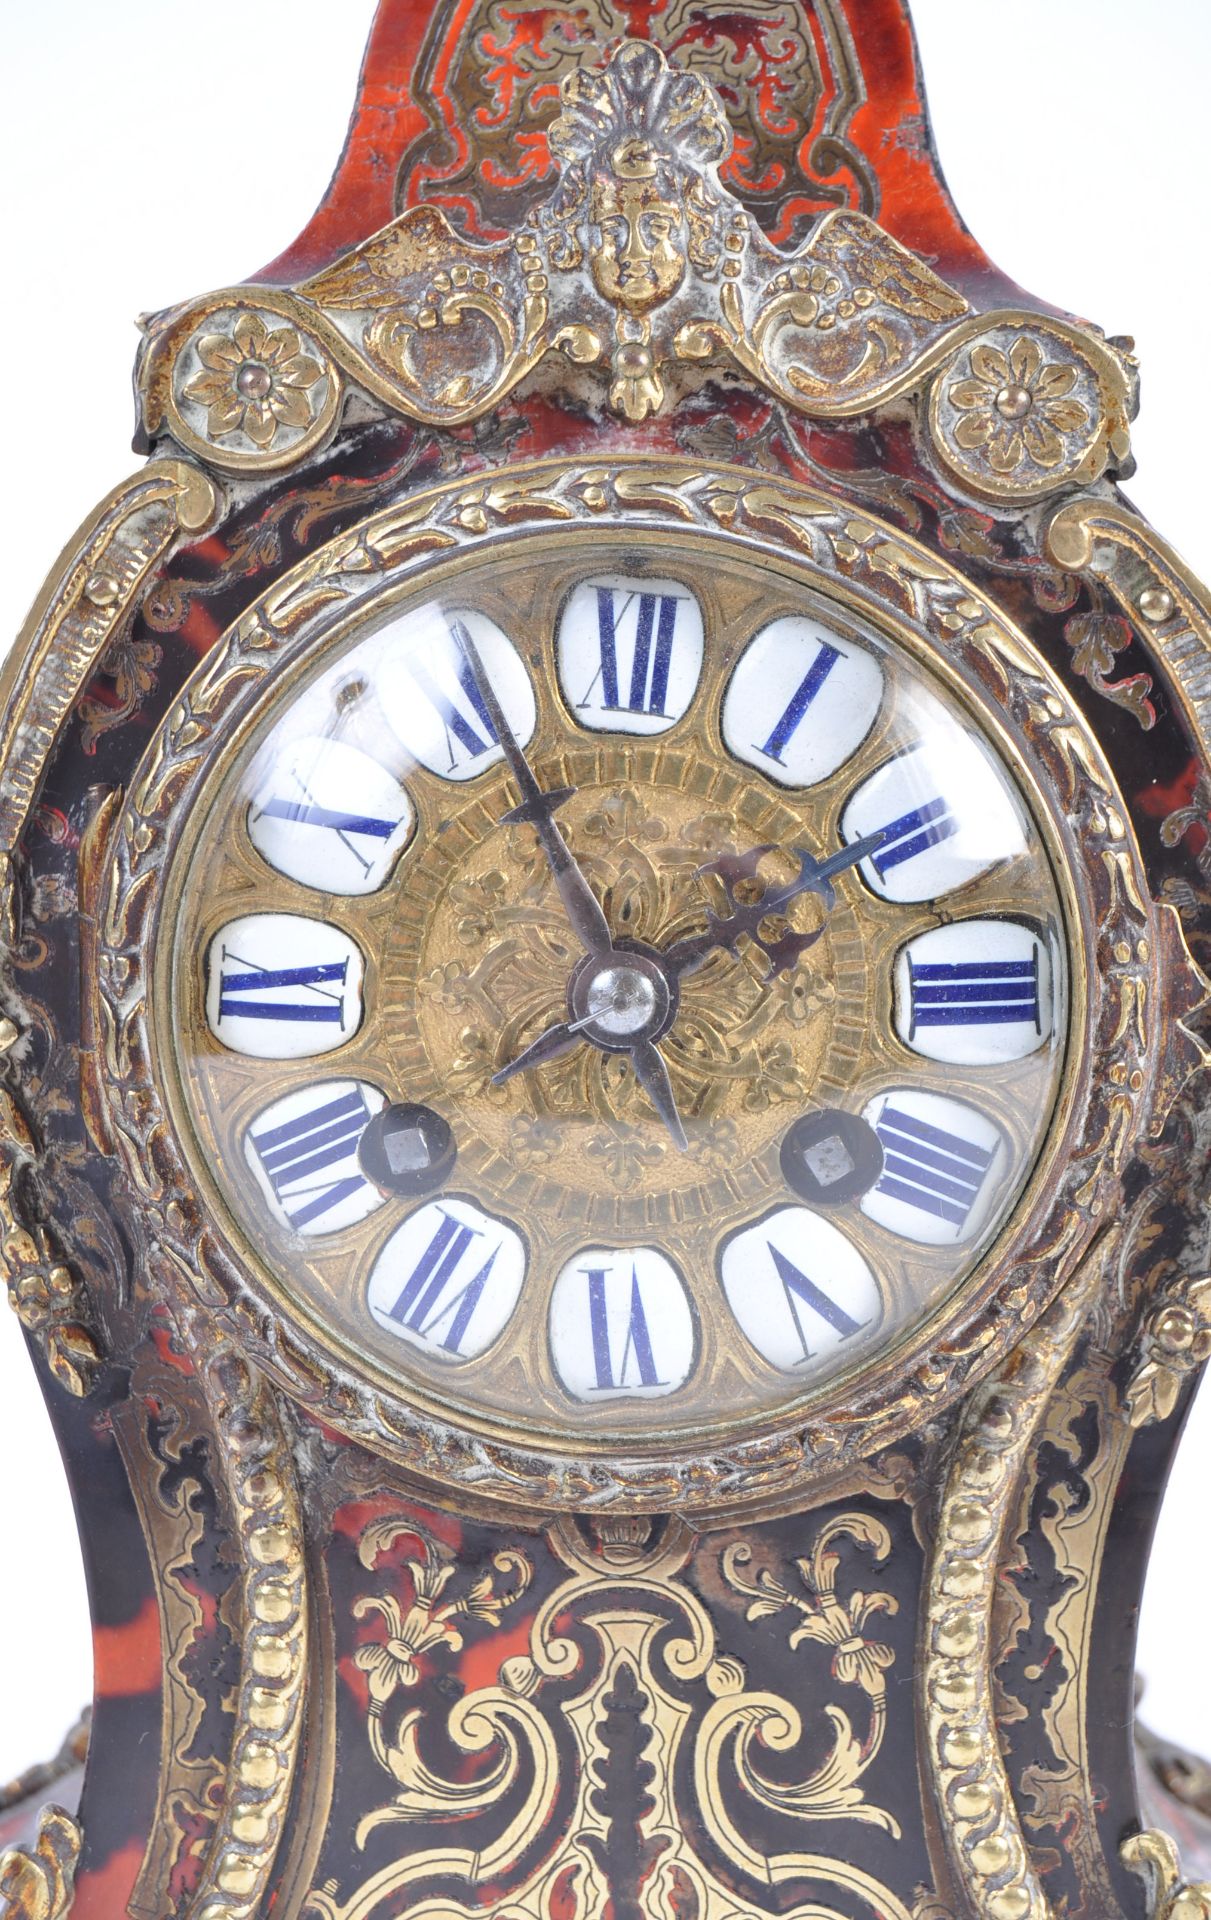 AD MOUGIN OF PARIS FRENCH BOULLEWORK MANTLE CLOCK - Image 2 of 7